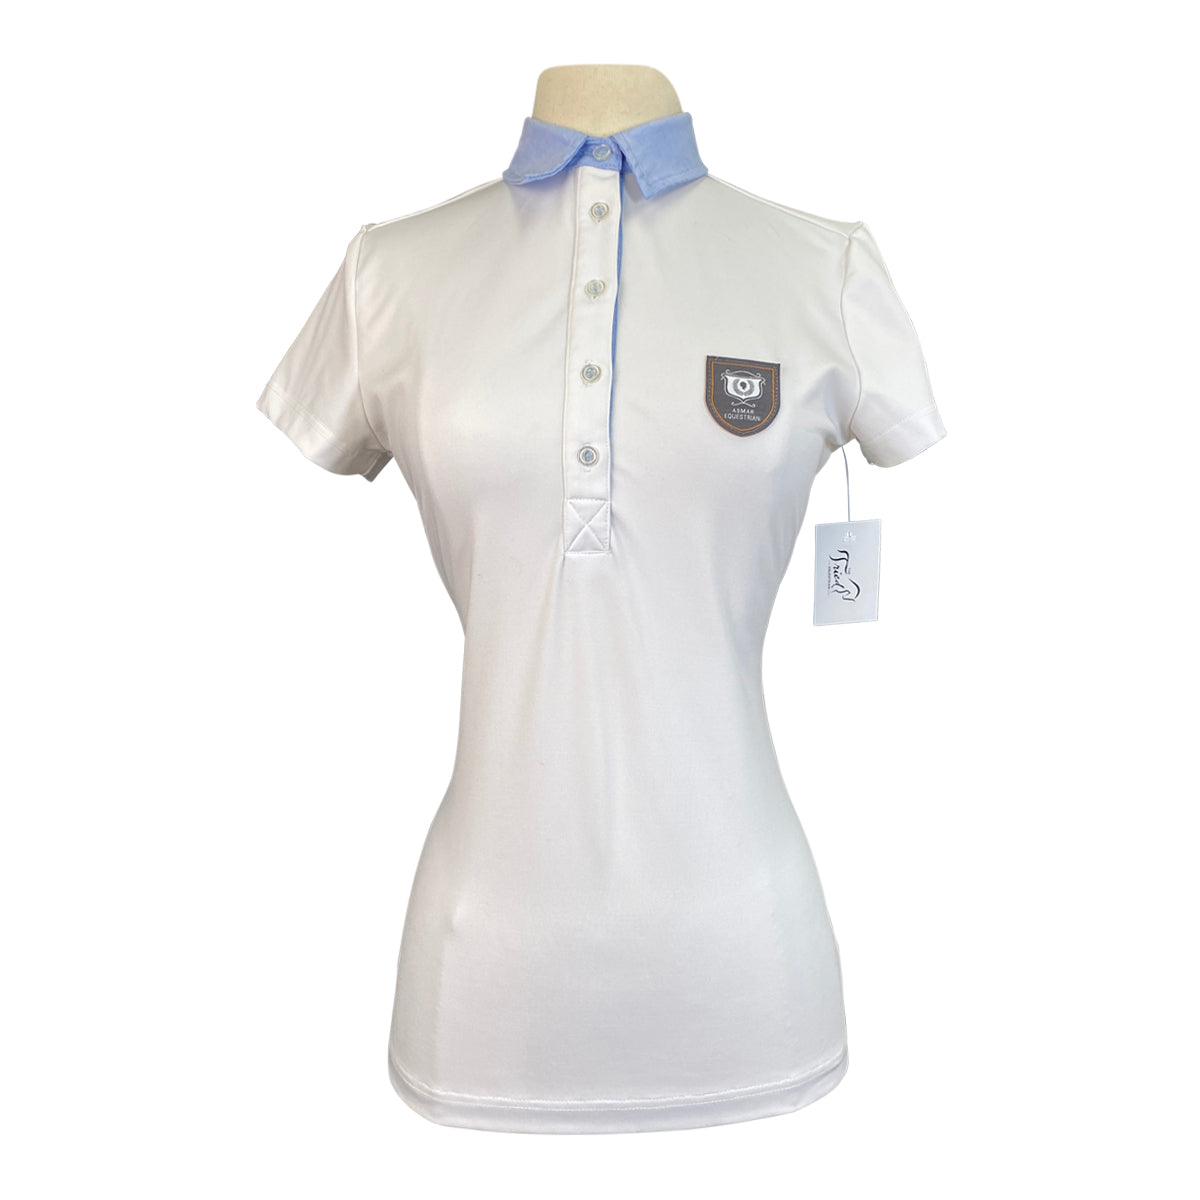 uestrian 1/4 Button-Up Short Sleeve Polo in White/Chambray